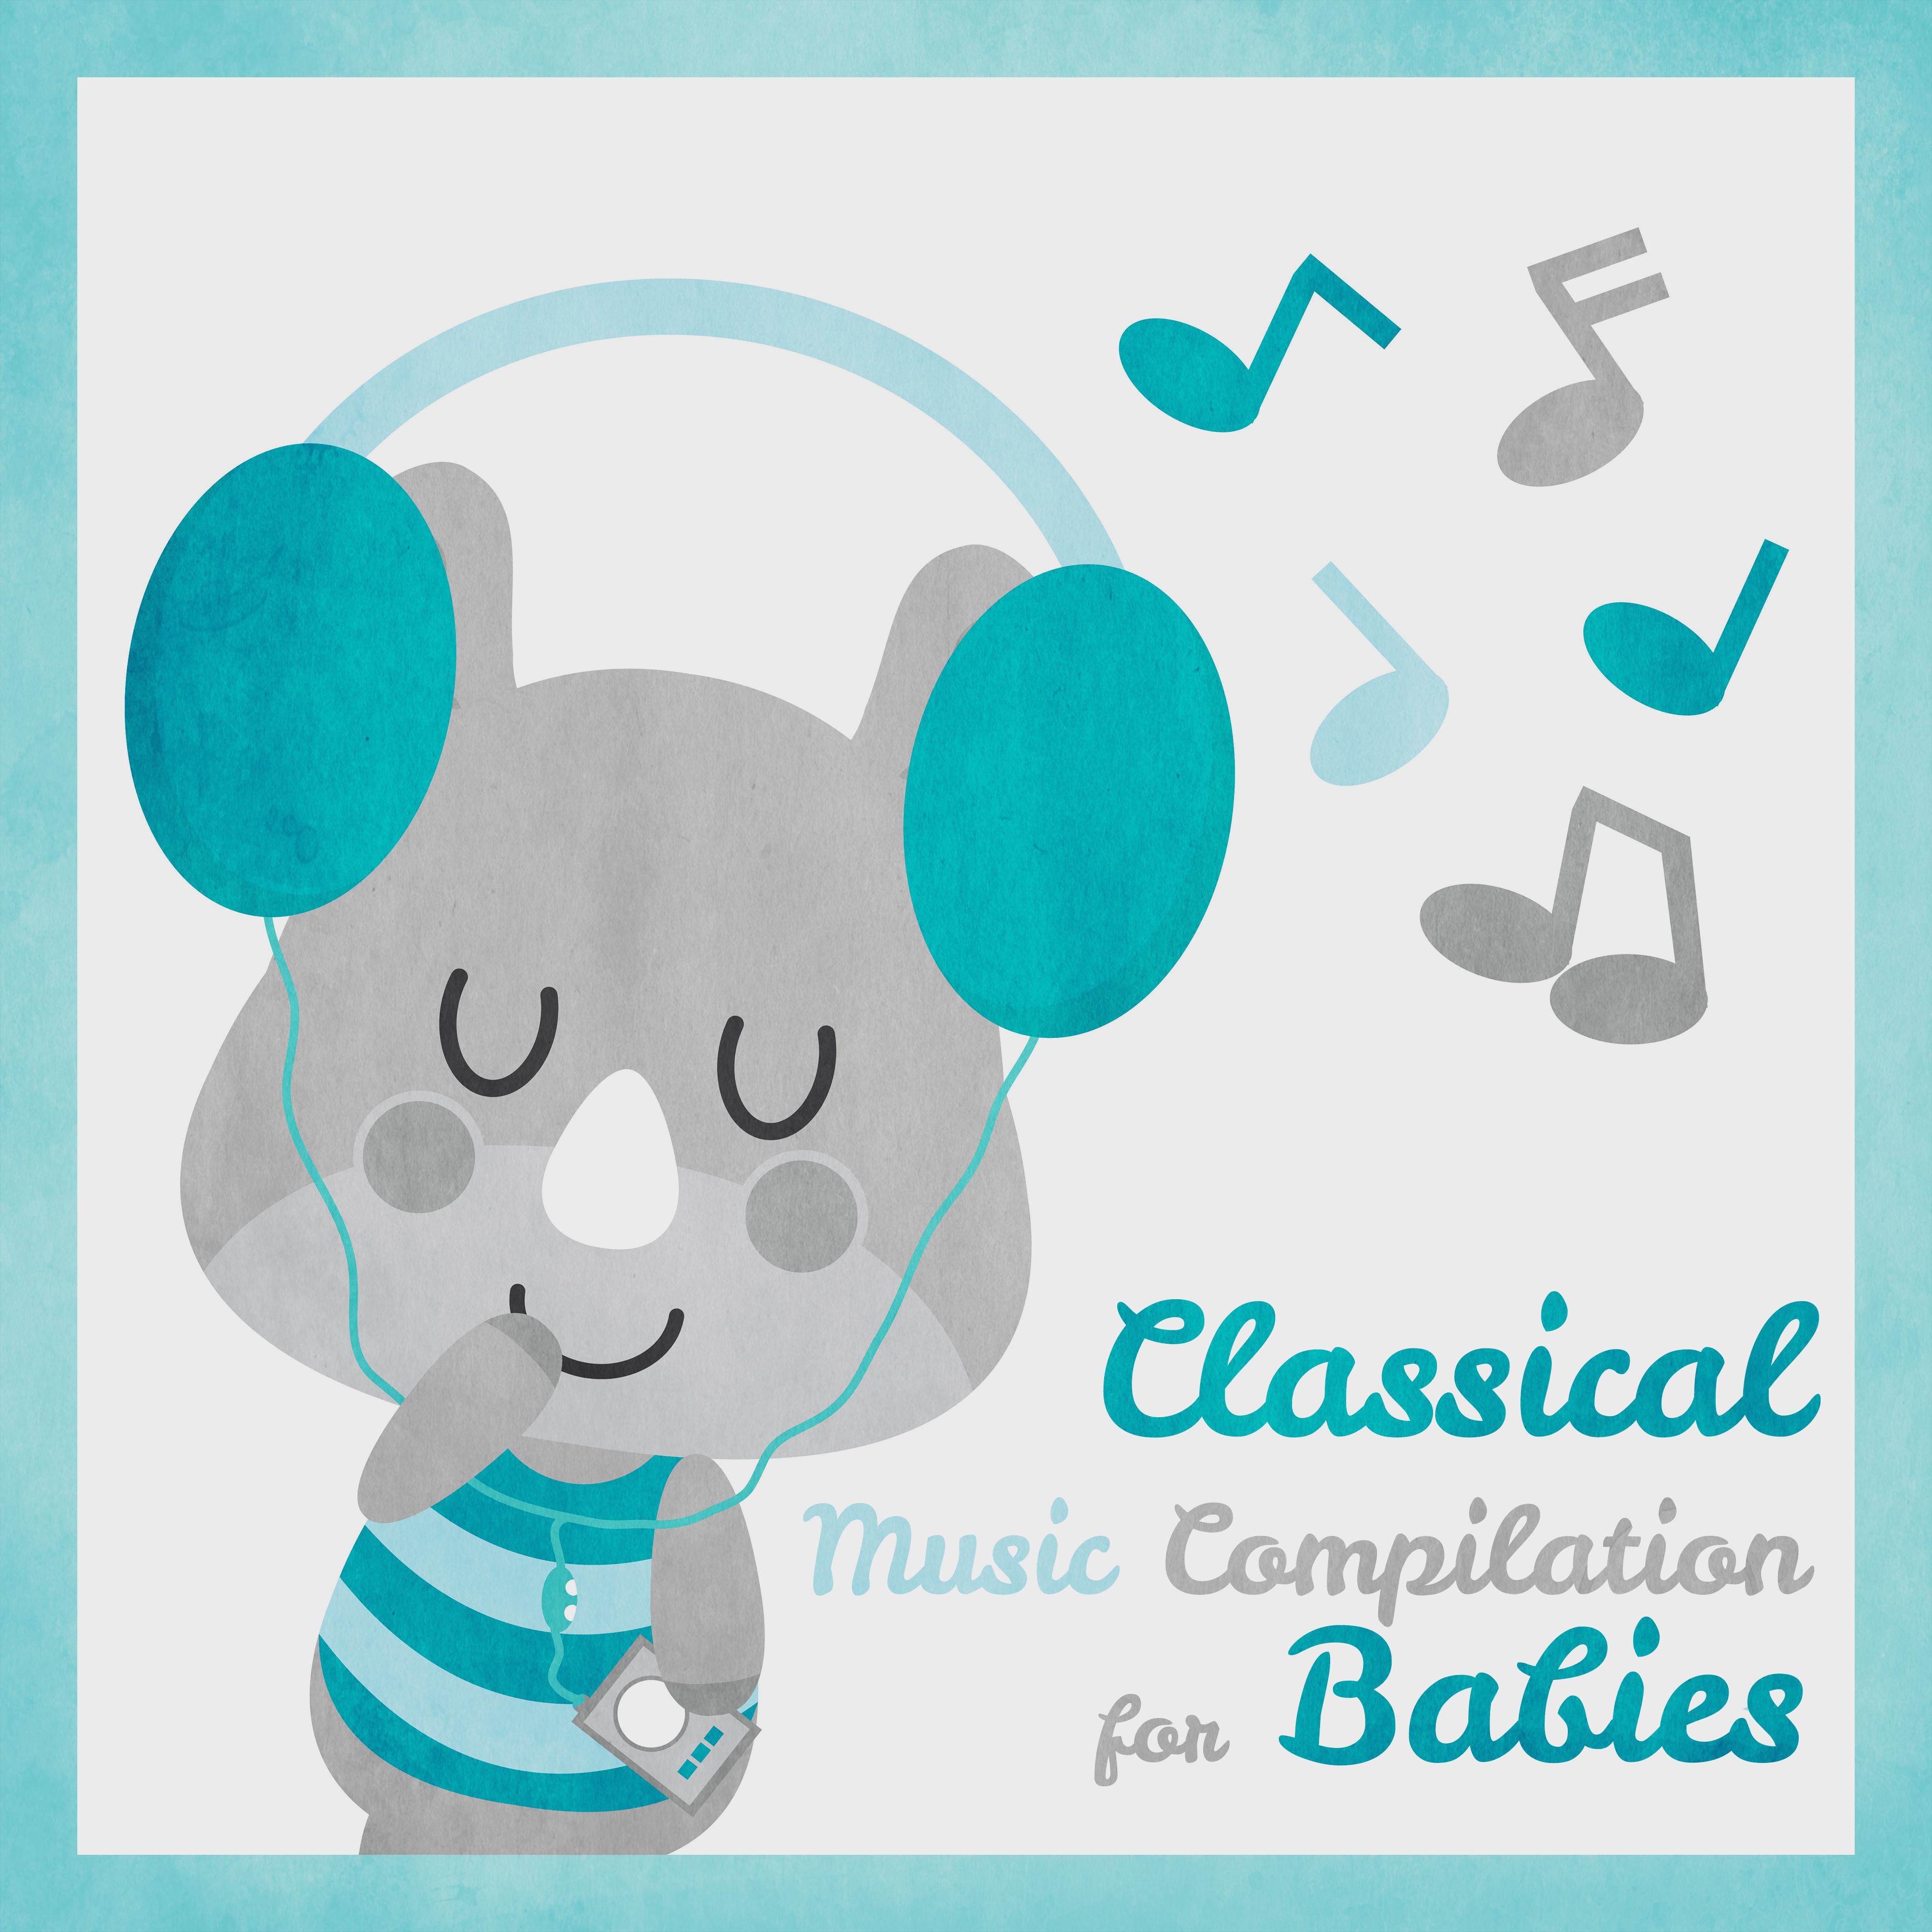 Classical Music Compilation for Babies